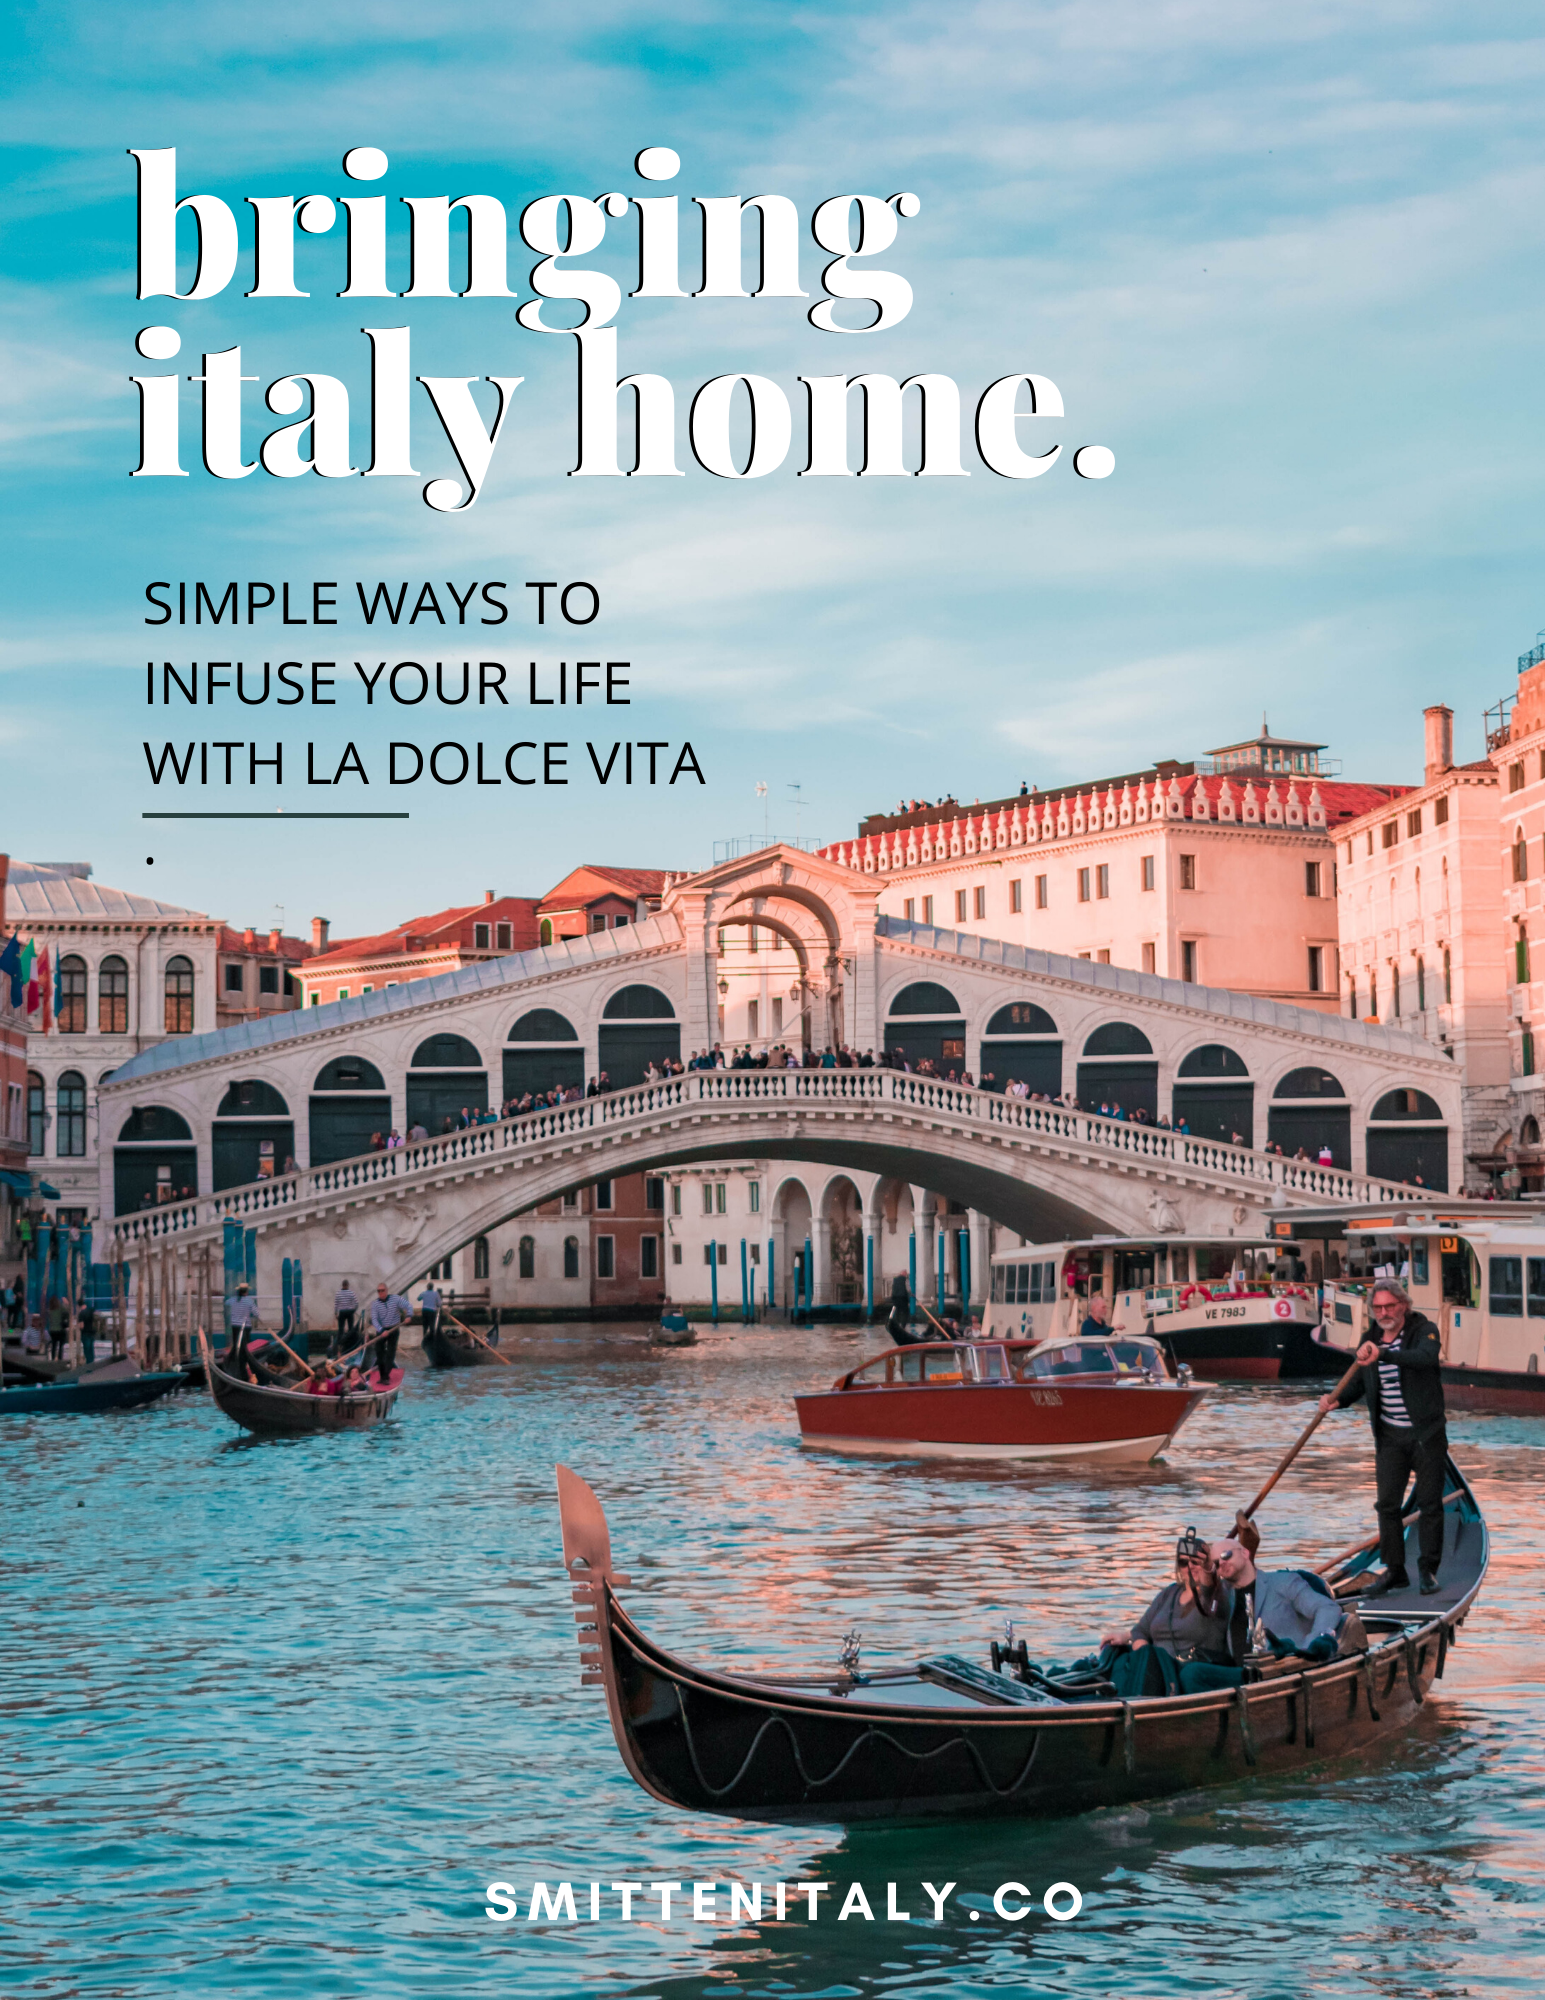 Bringing Italy Home. (simple ideas to live "la dolce vita" at home) 3